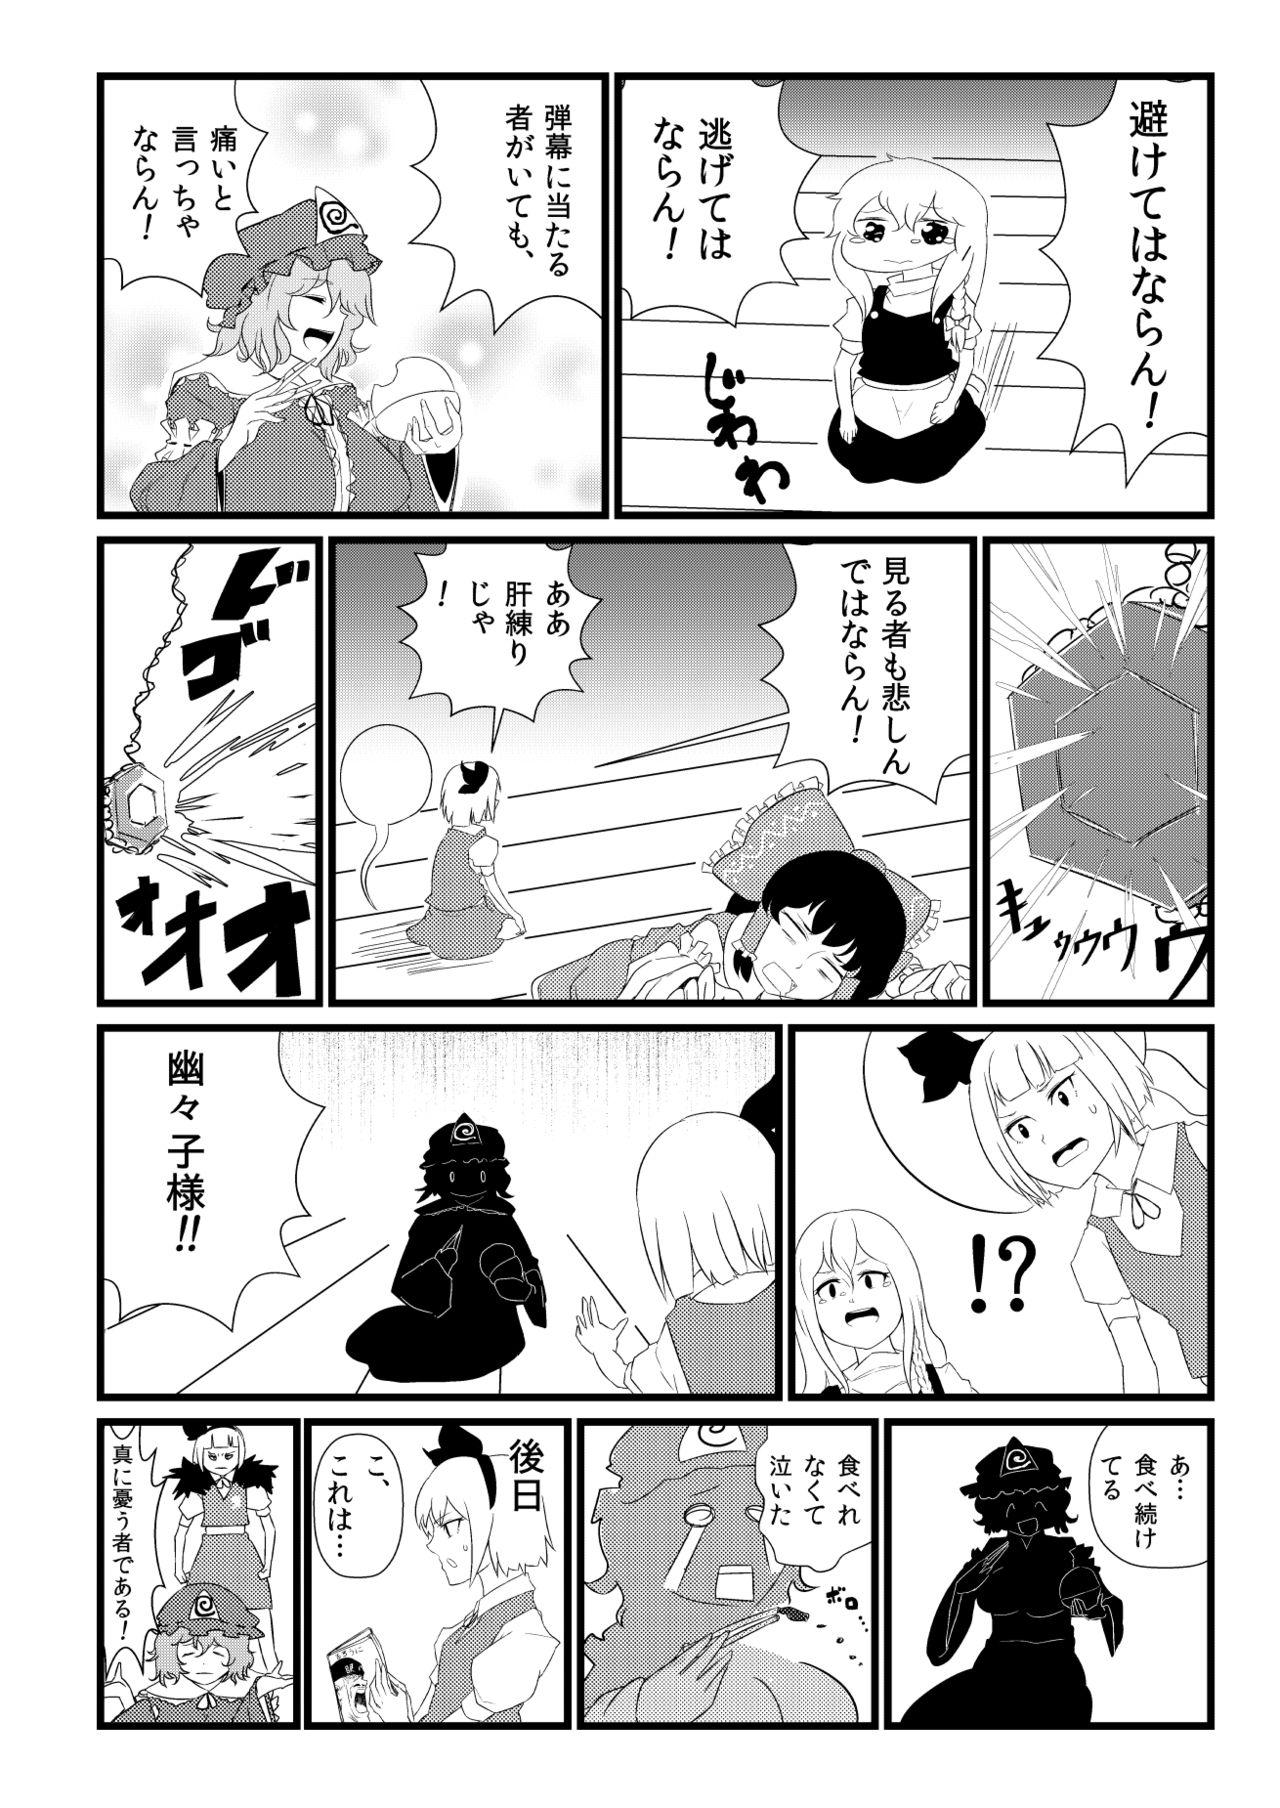 Double Penetration 東方板としあき合同誌5 - Touhou project Dirty Talk - Page 4